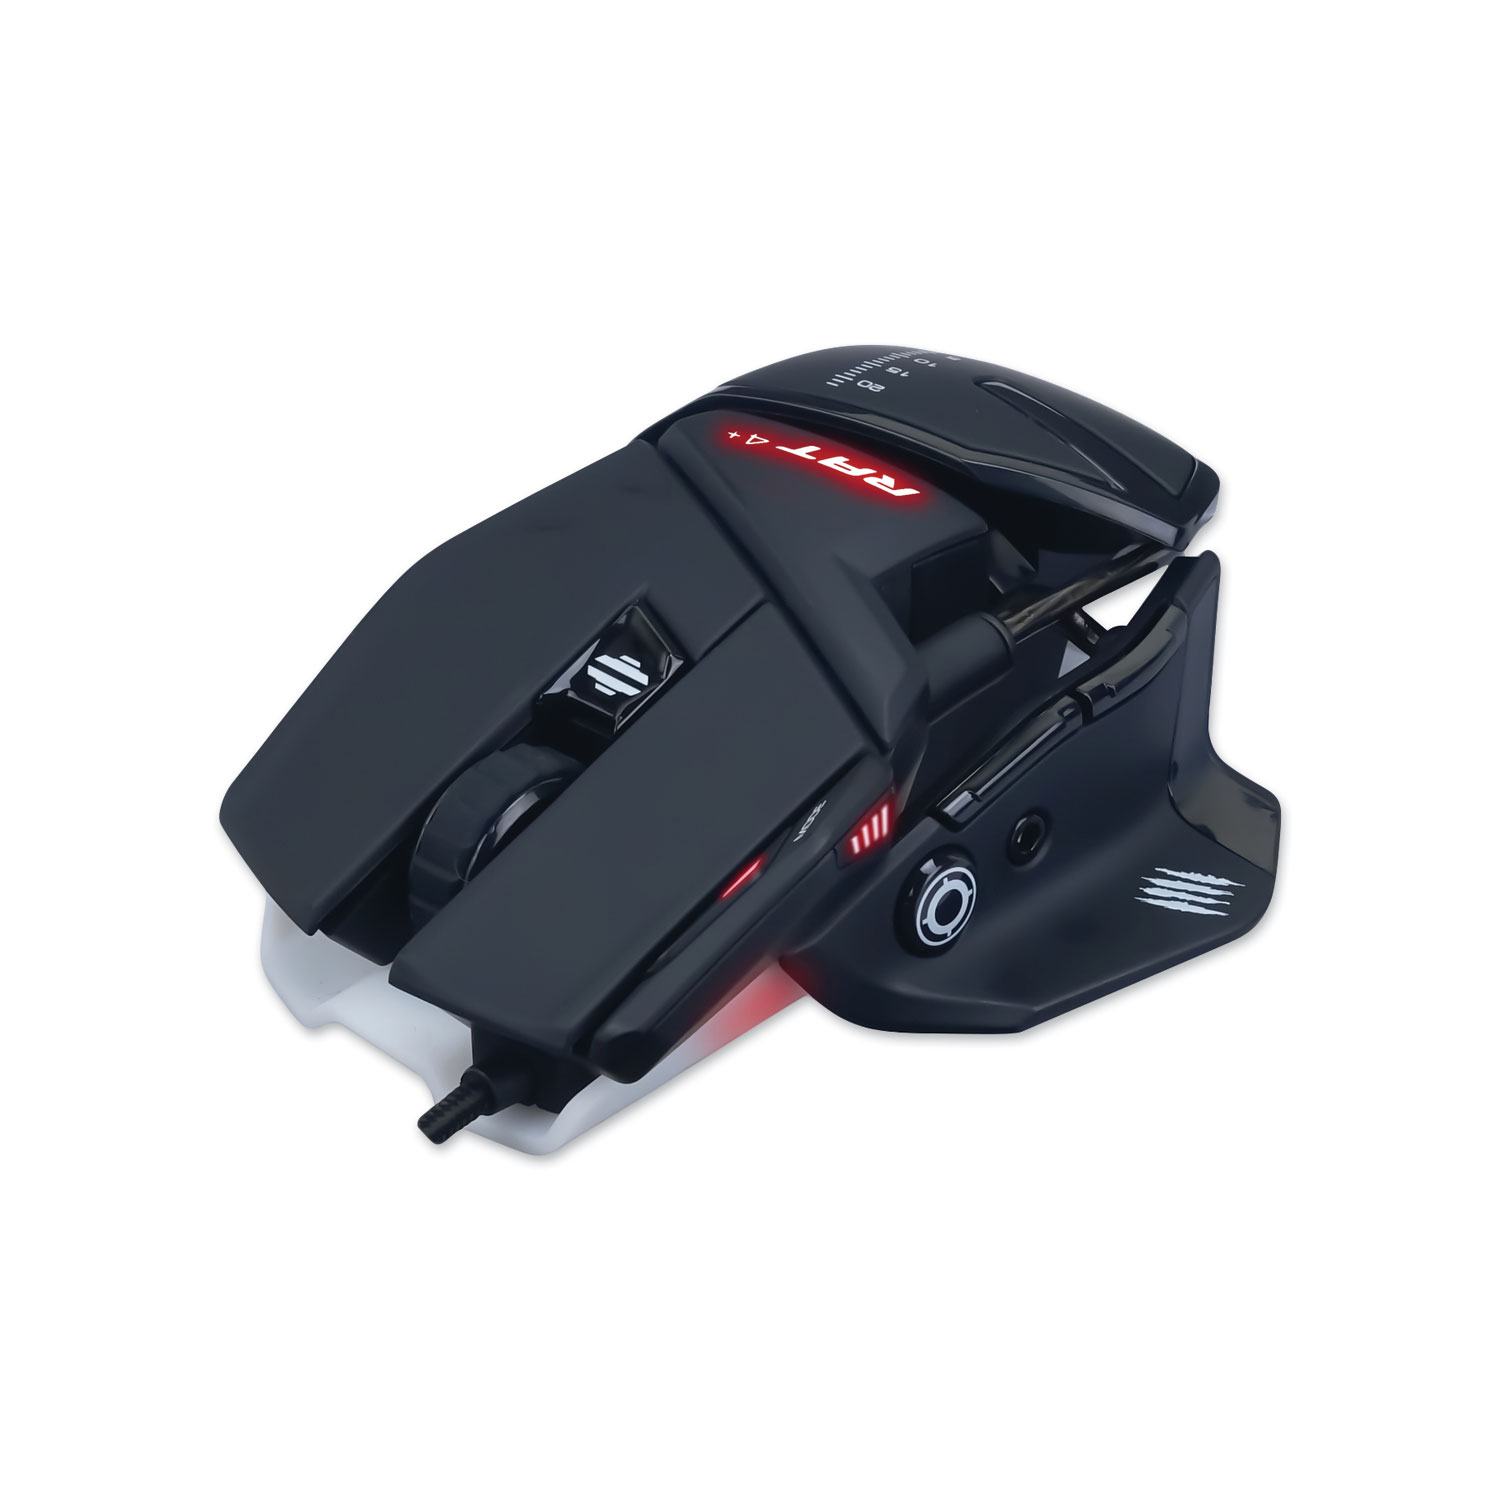  Mad Catz MR03MCAMBL00 Authentic R.A.T. 4+ Optical Gaming Mouse, USB 2.0, Left/Right Hand Use, Black (VERMR03MCAMBL00) 